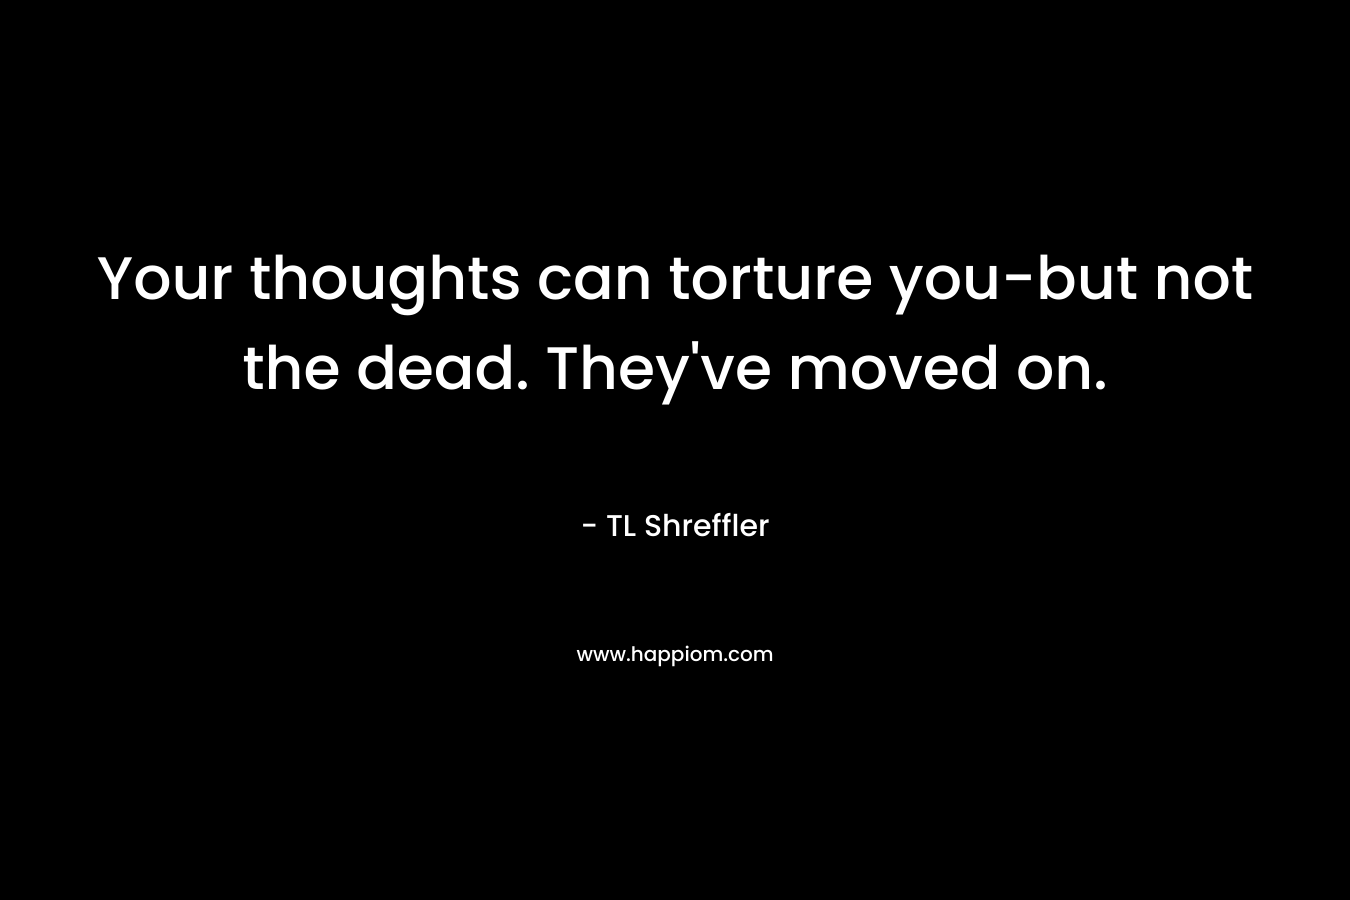 Your thoughts can torture you-but not the dead. They’ve moved on. – TL Shreffler